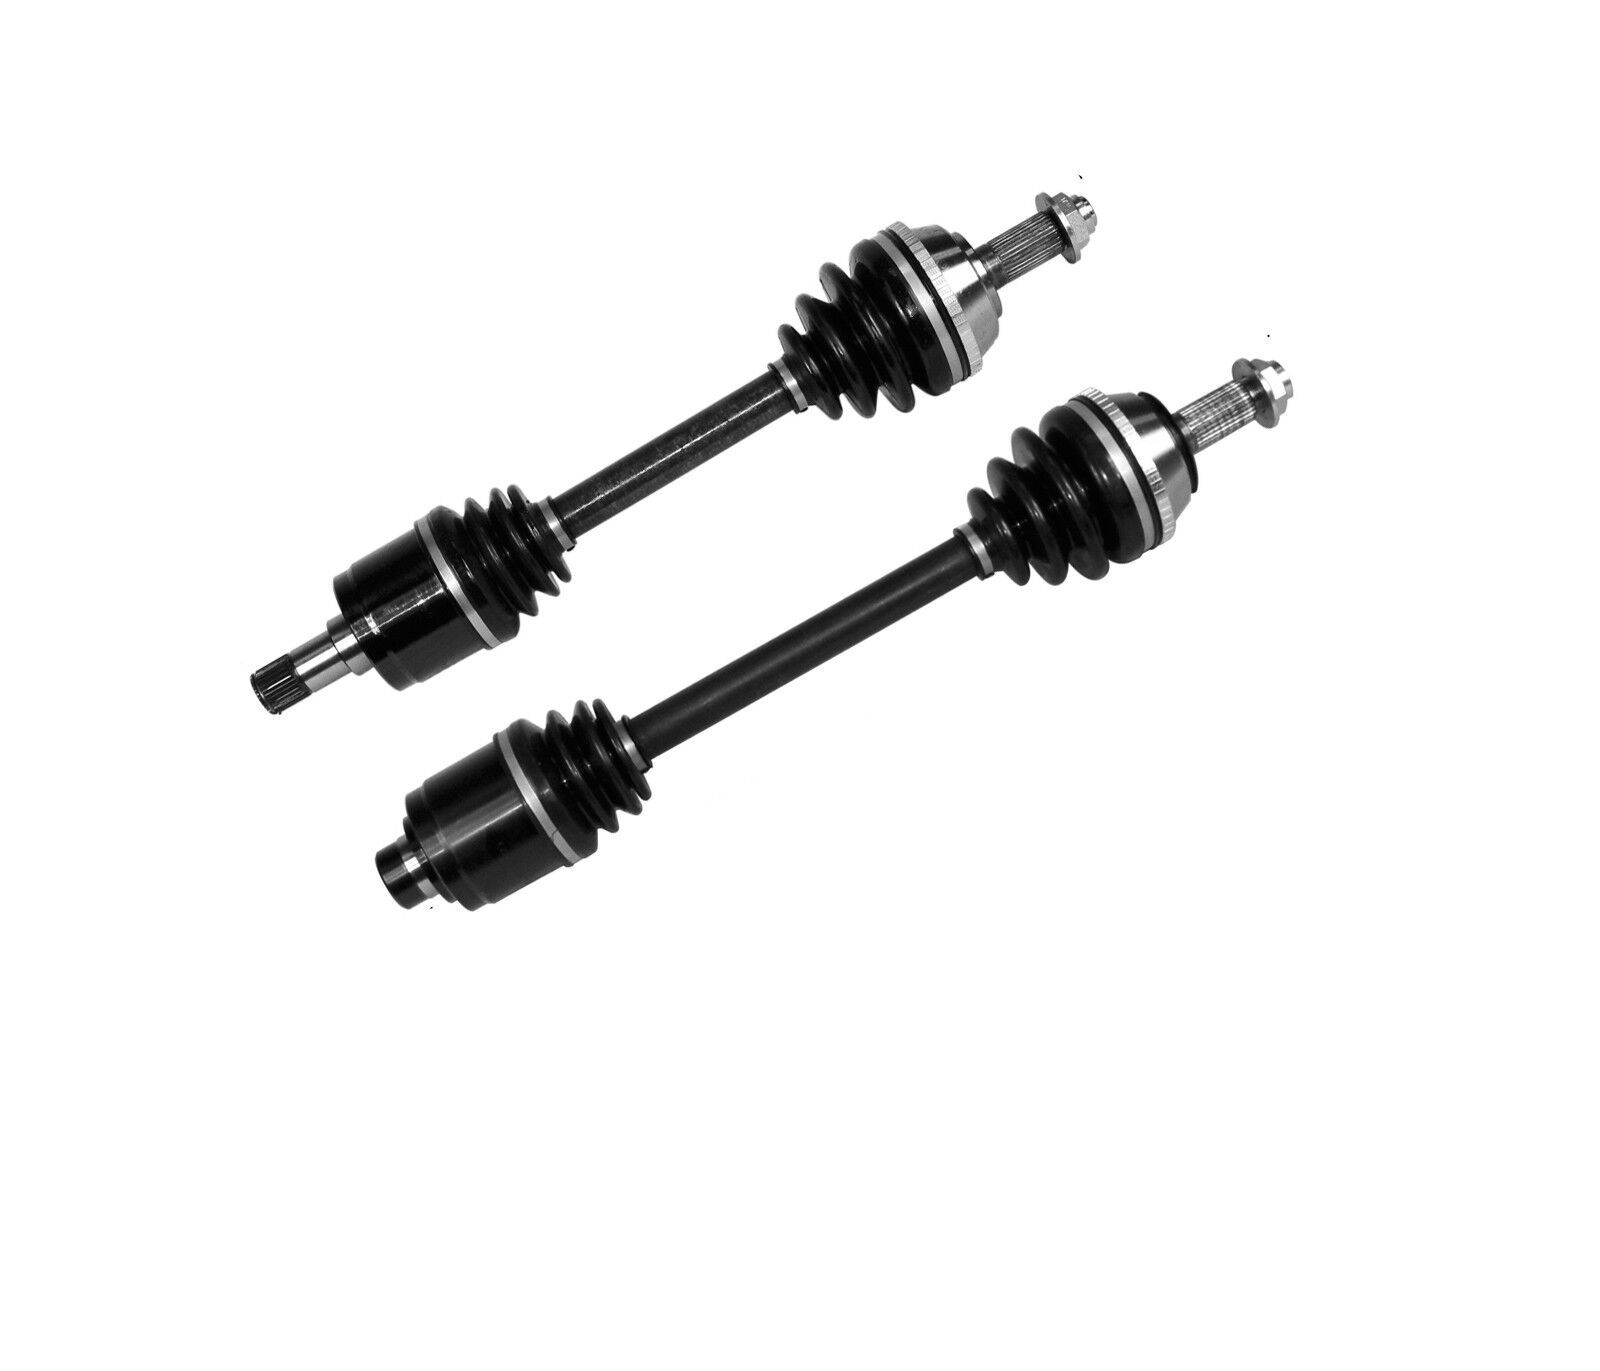 2 New CV Axles OE Replacement With Warranty Fit Acura Legend 1991 1992 93 94 95